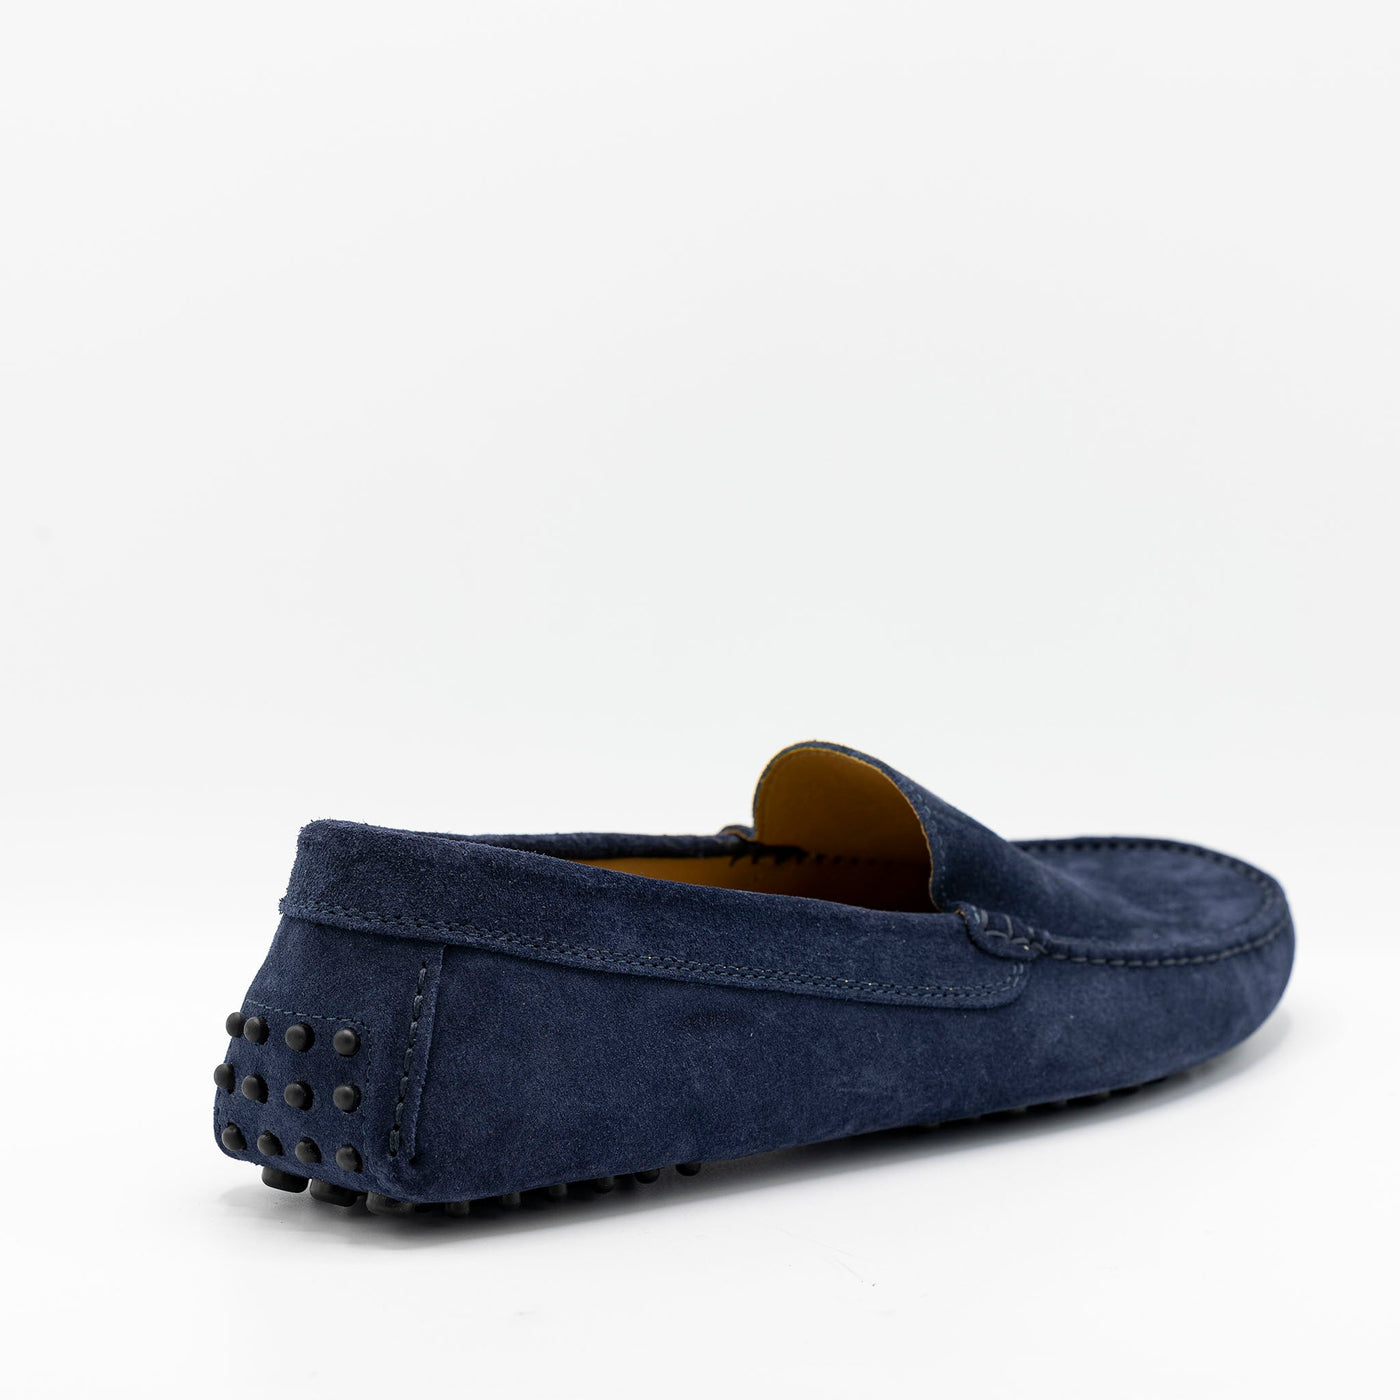 Plain car shoe with rubber pebbles underneath the sole. Made from Navy Blue calf suede. 